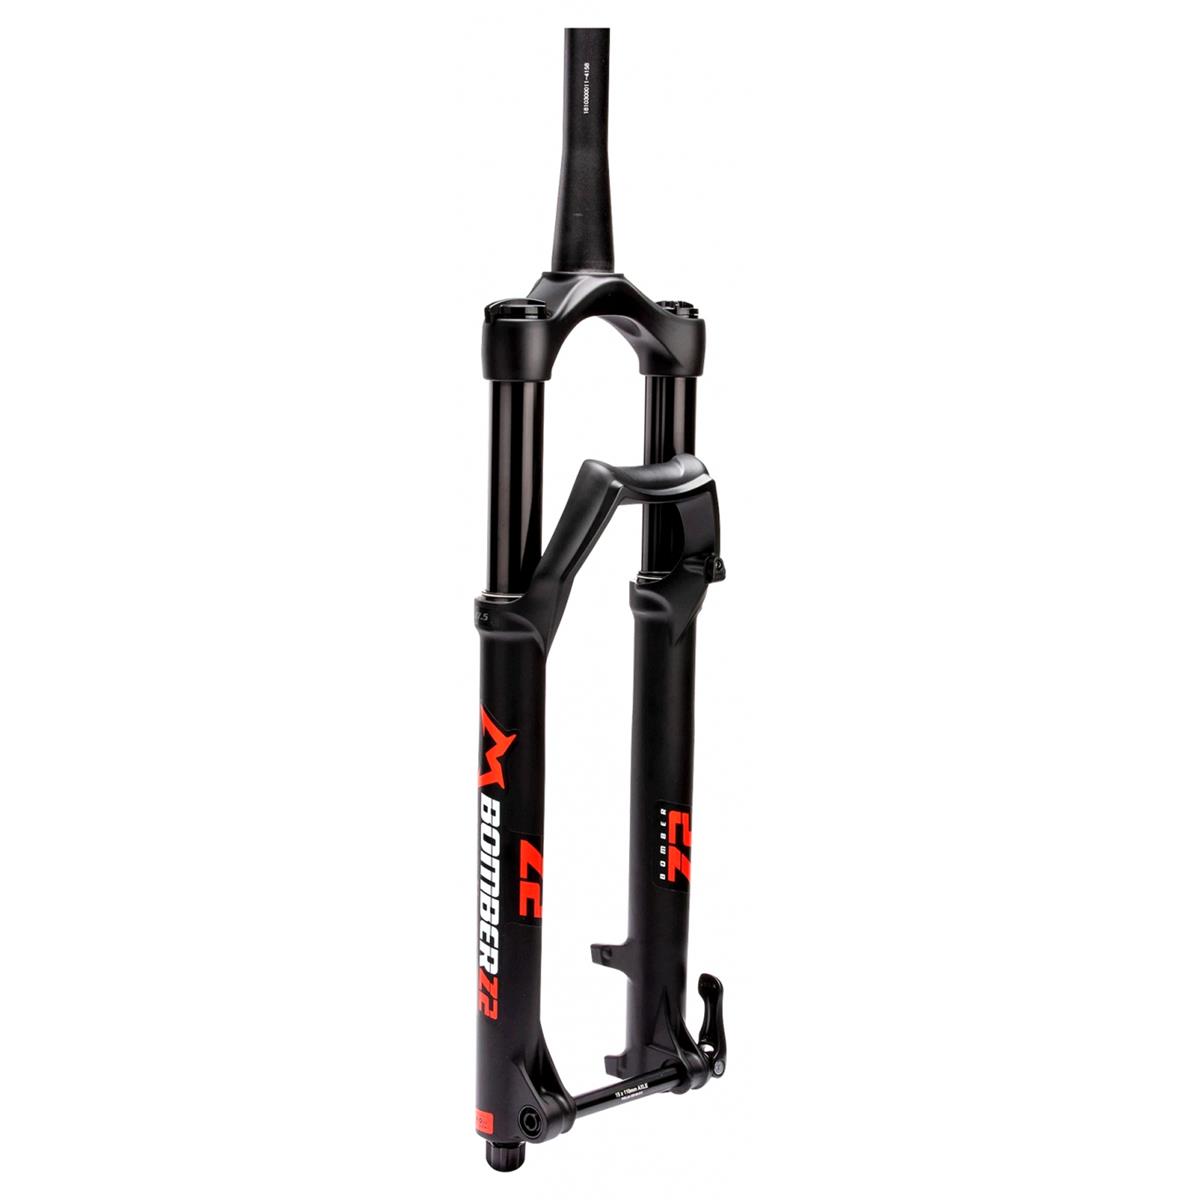 Forcella Bomber Z2 Air 27.5'' 140mm 15x110 boost Rail Sweep-Adj offset 44mm nero